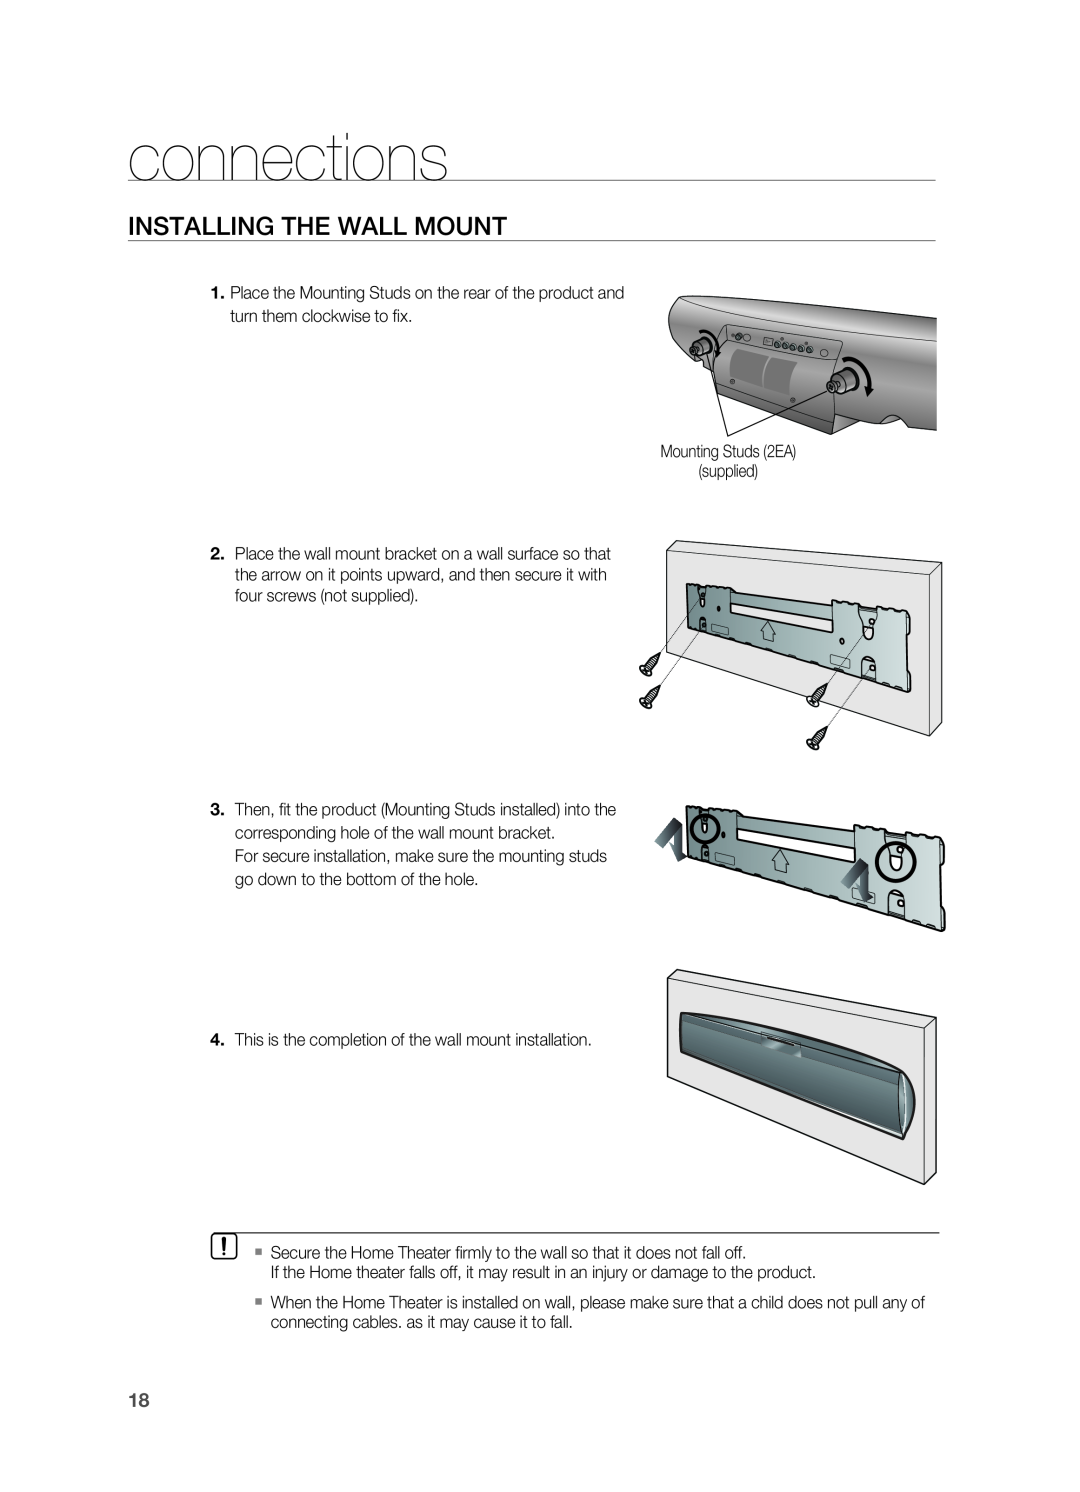 Samsung HT-X810 user manual INSTAllING THE WAll MOUNT, connections 